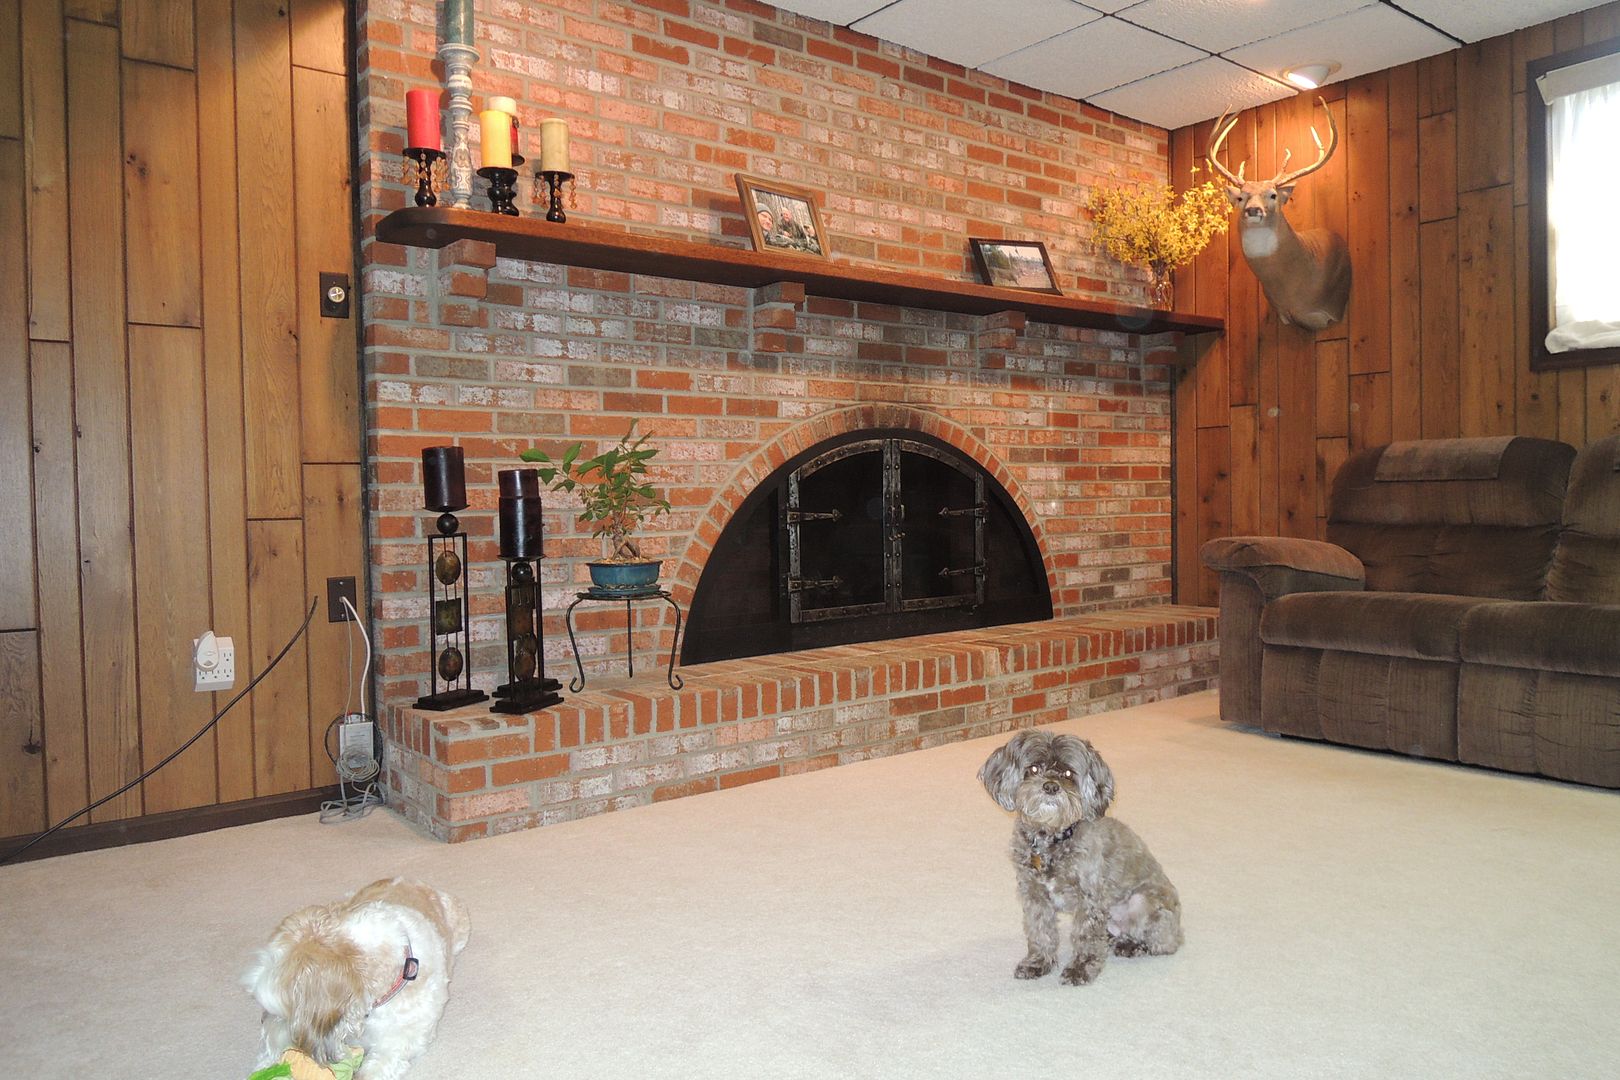 Pretty Fireplace with Gas Insert in La Plata MD Home for Sale.  Real Estate Sales by Realtor, Marie Lally, of O'Brien Realty of Southern Maryland